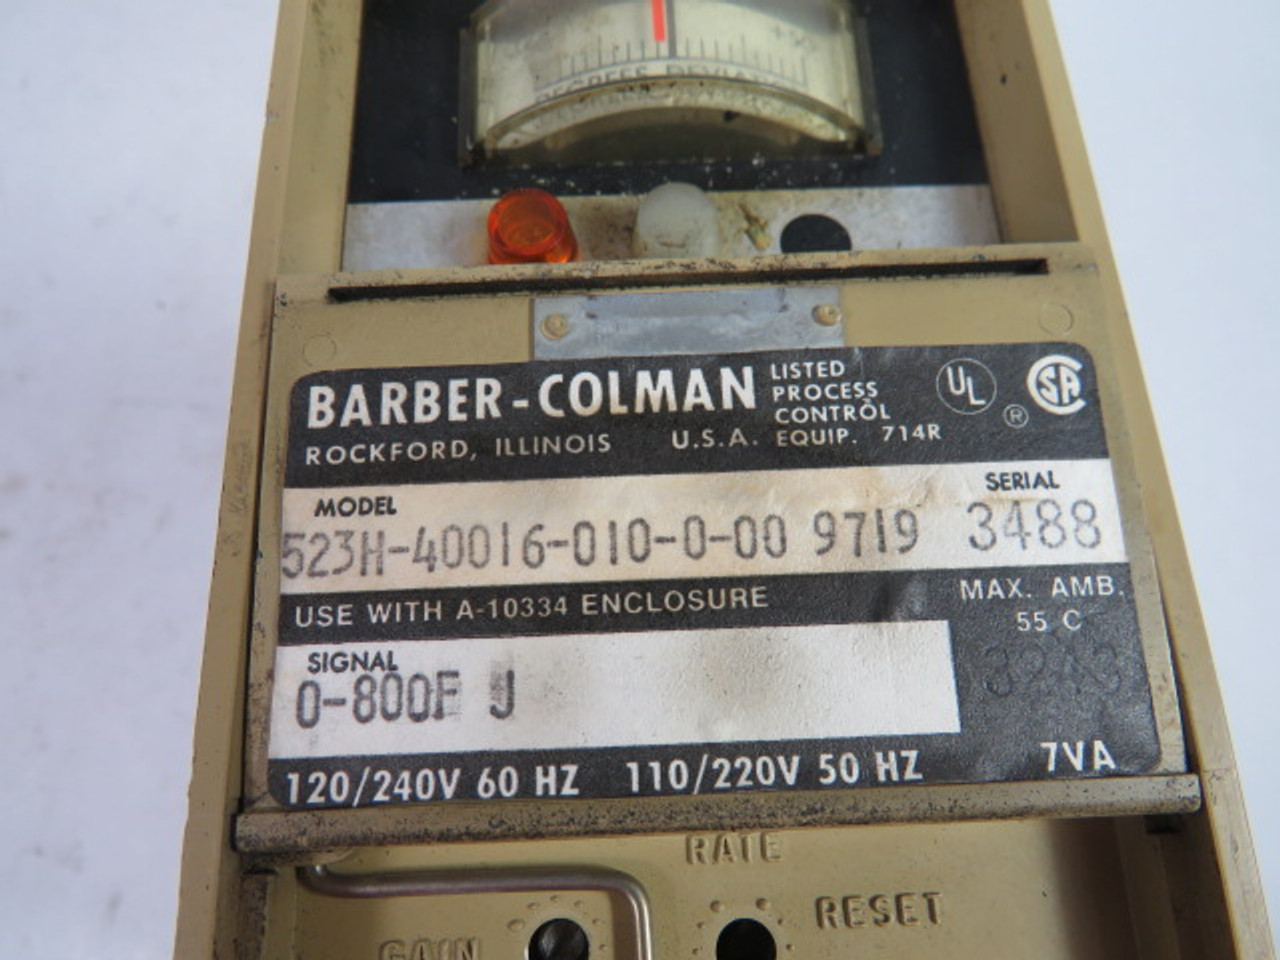 Barber Colman 523H-40016-010-0-00 Solid State Controller 0-800F USED